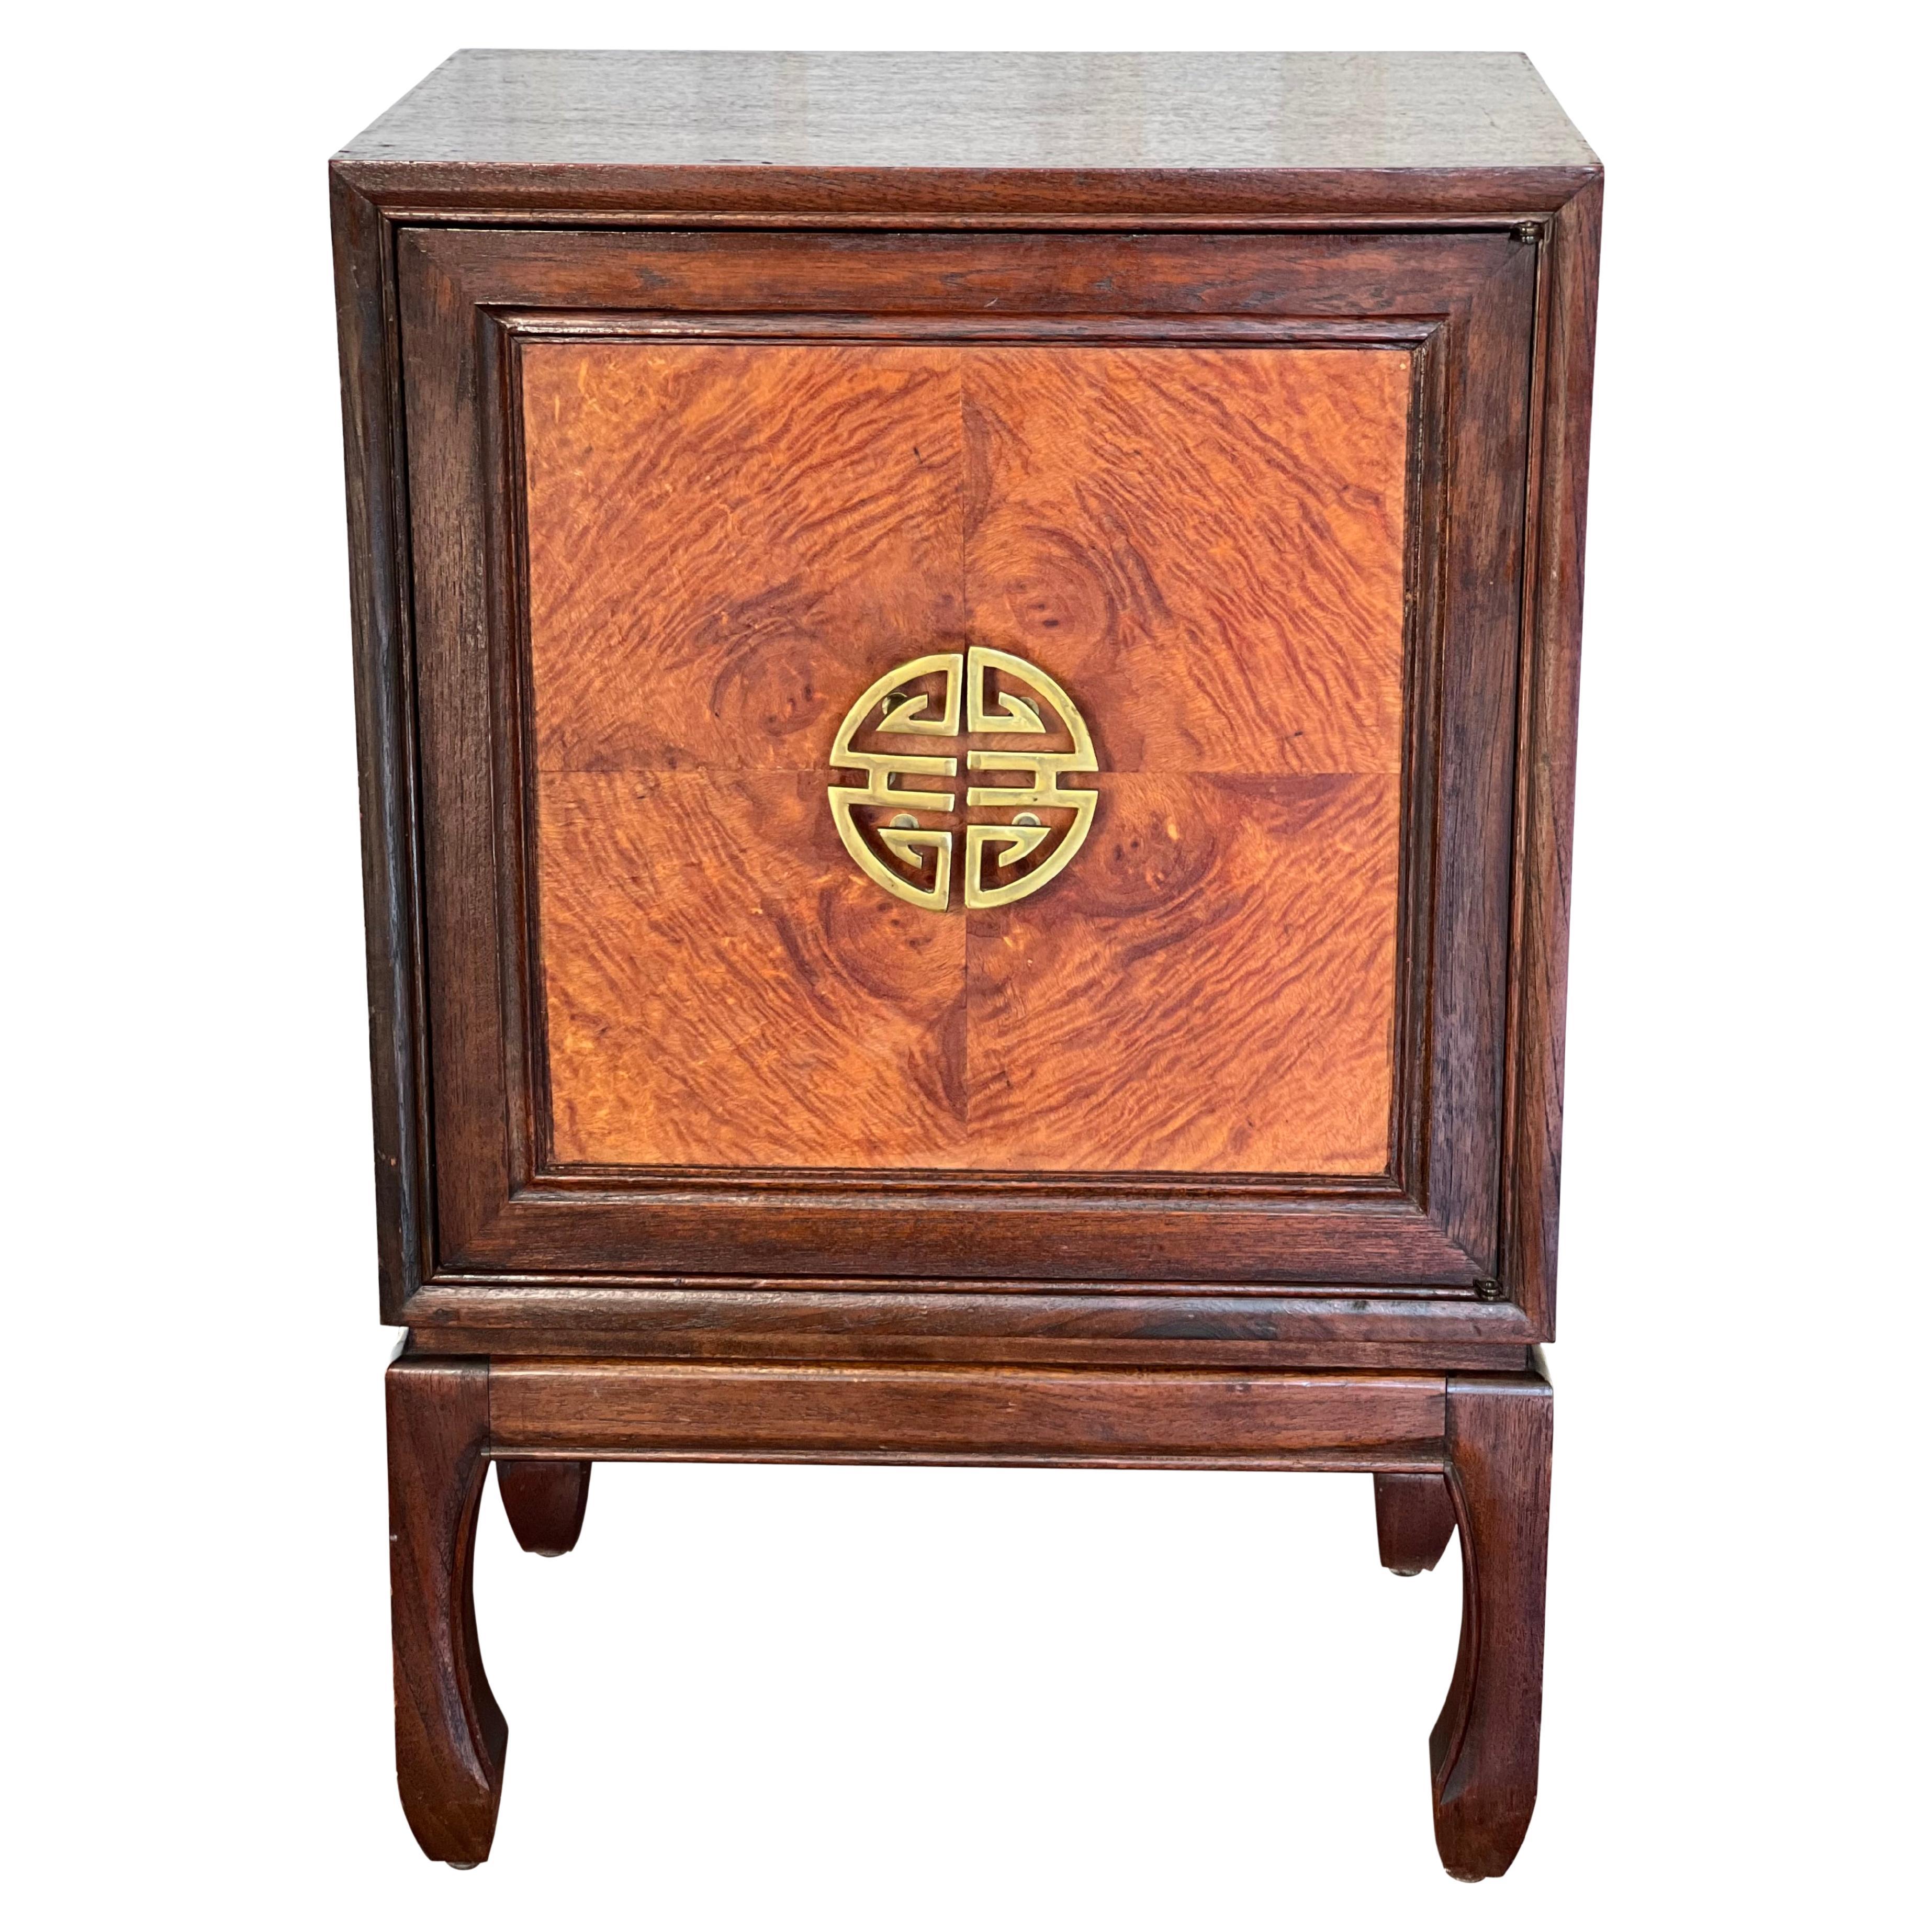 Early 20th Century Asian Style Petite Pipe and Tobacco Cabinet For Sale